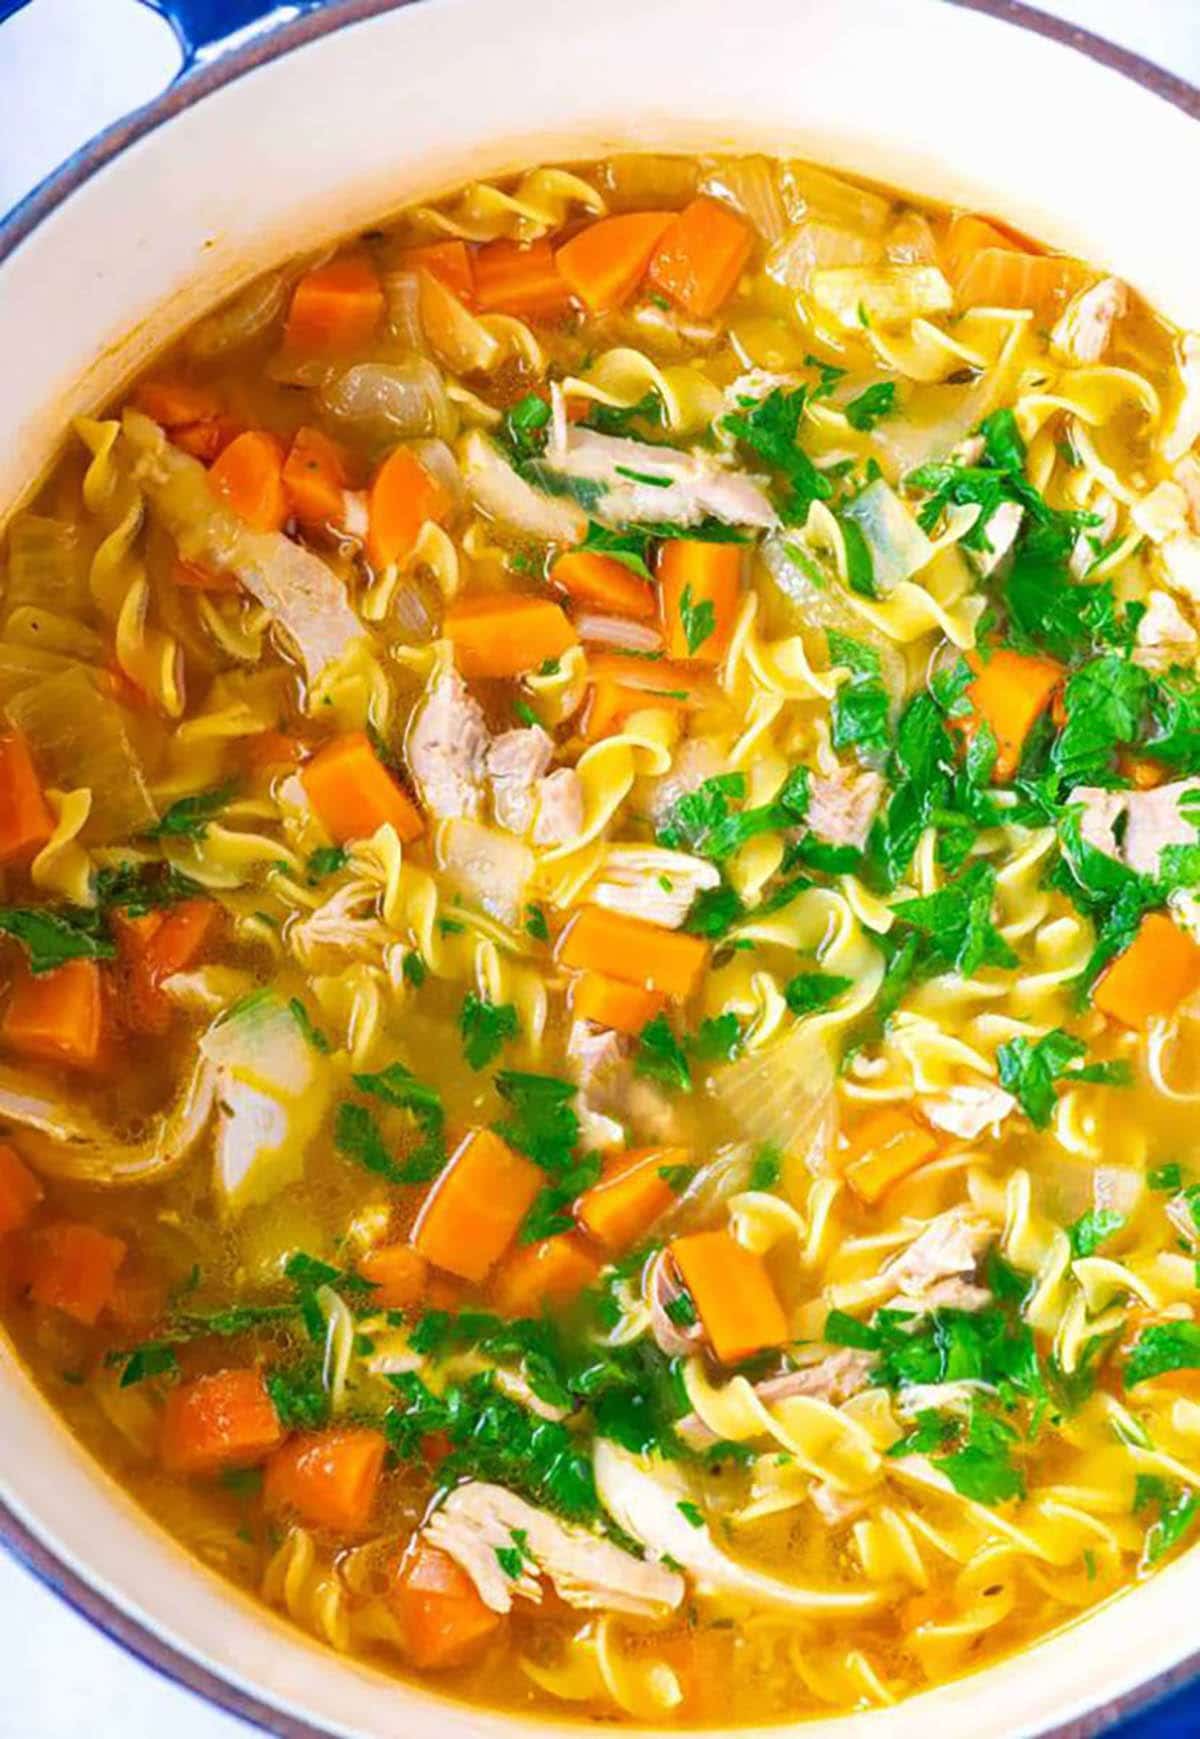 Chicken Noodle Soup topped with chopped parsley